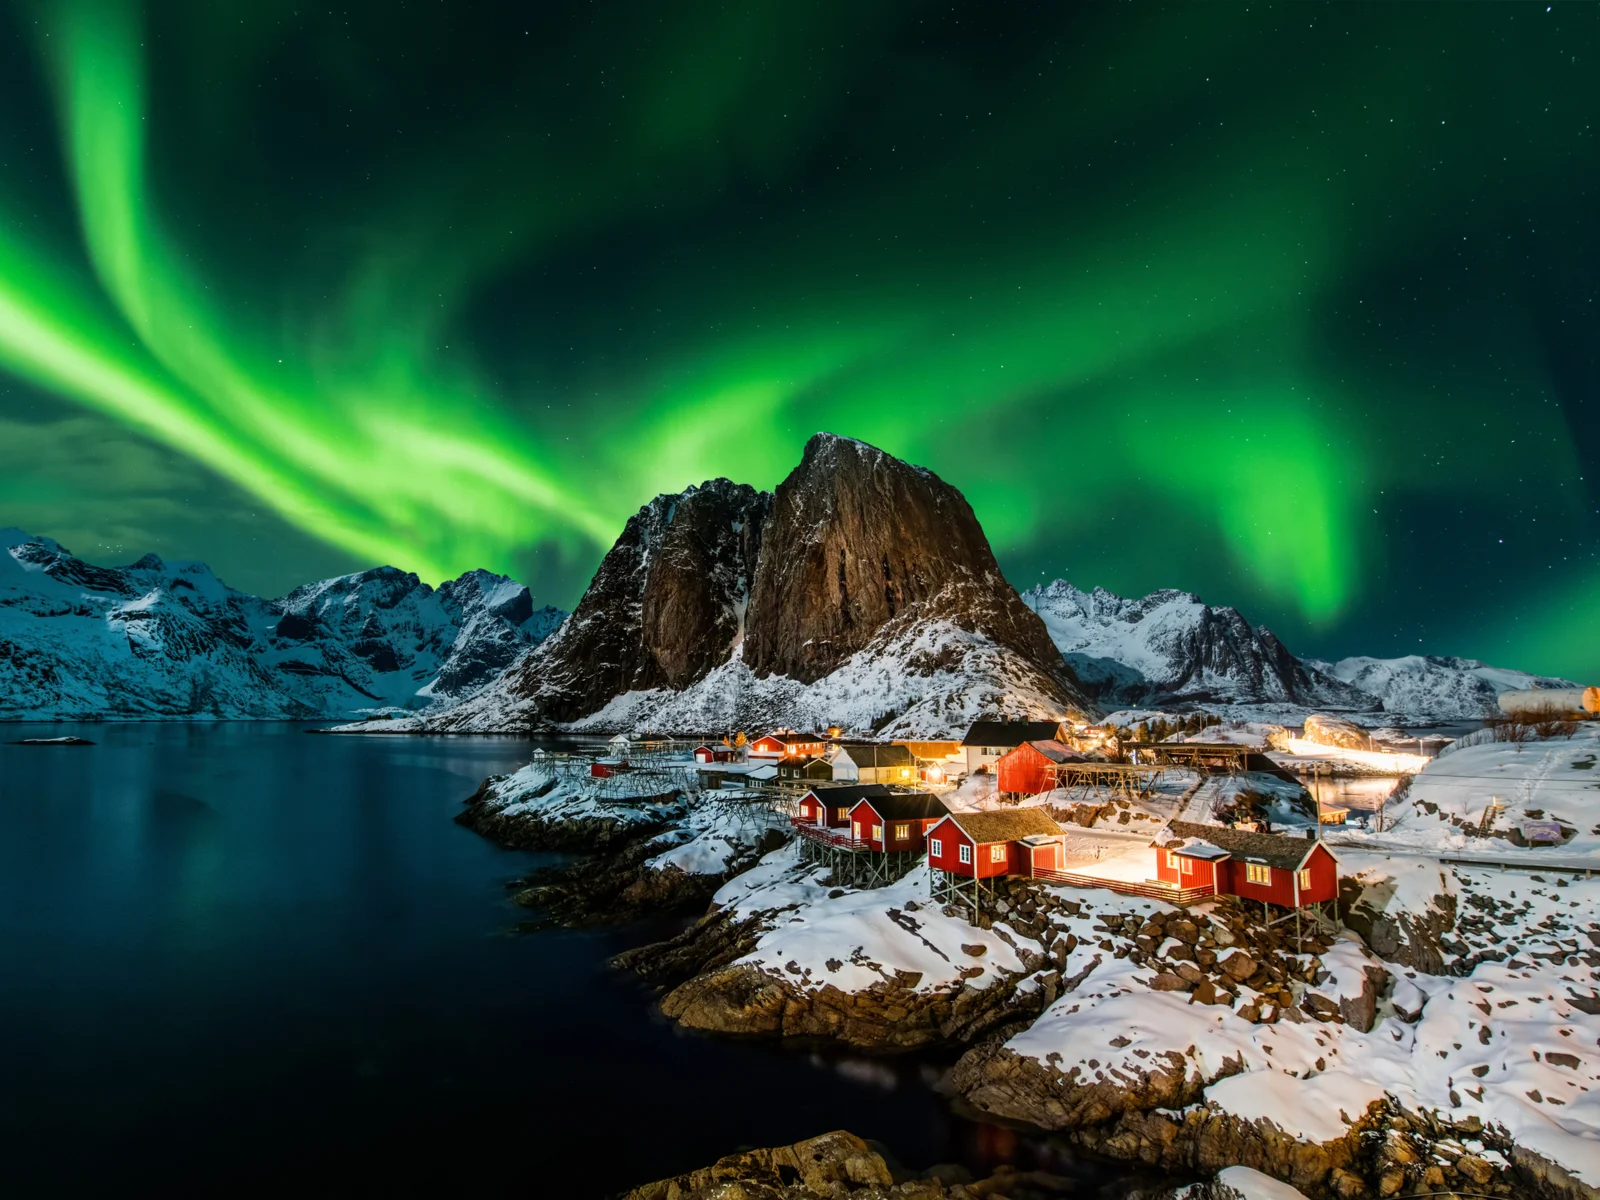 The Northern Lights pictured as a reason to visit Norway